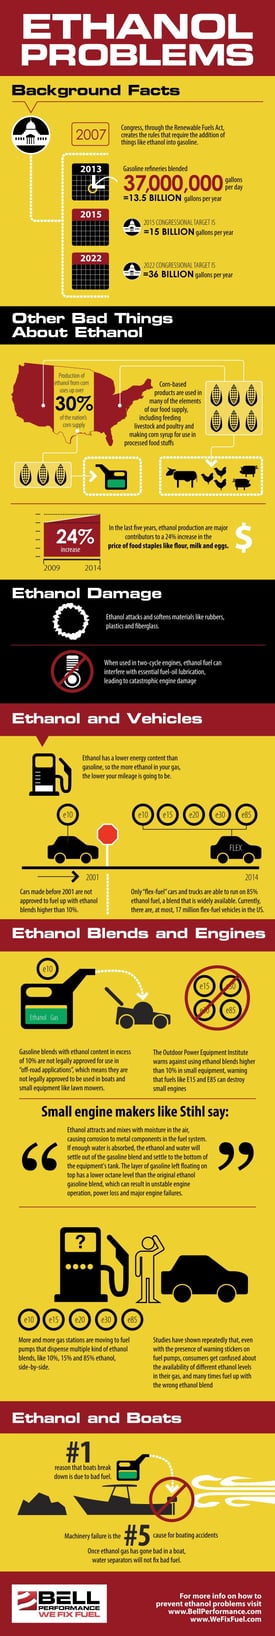 What is the difference between ethanol and methanol?